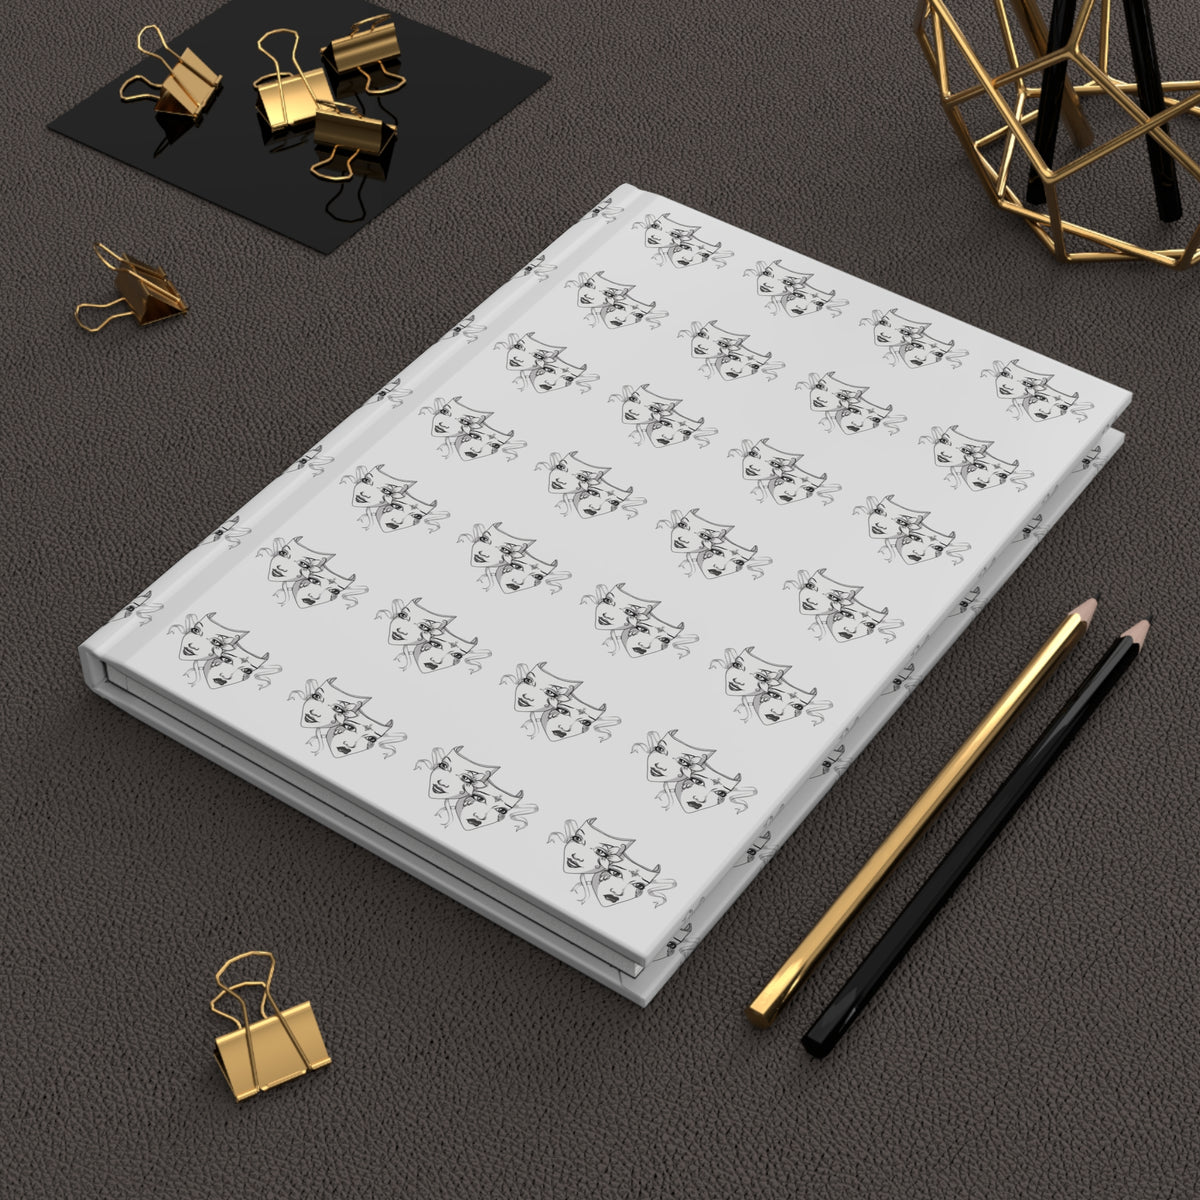 Theatre Mask Pattern Hard Journal - Capture Your Thoughts in Style with this Elegant Notebook